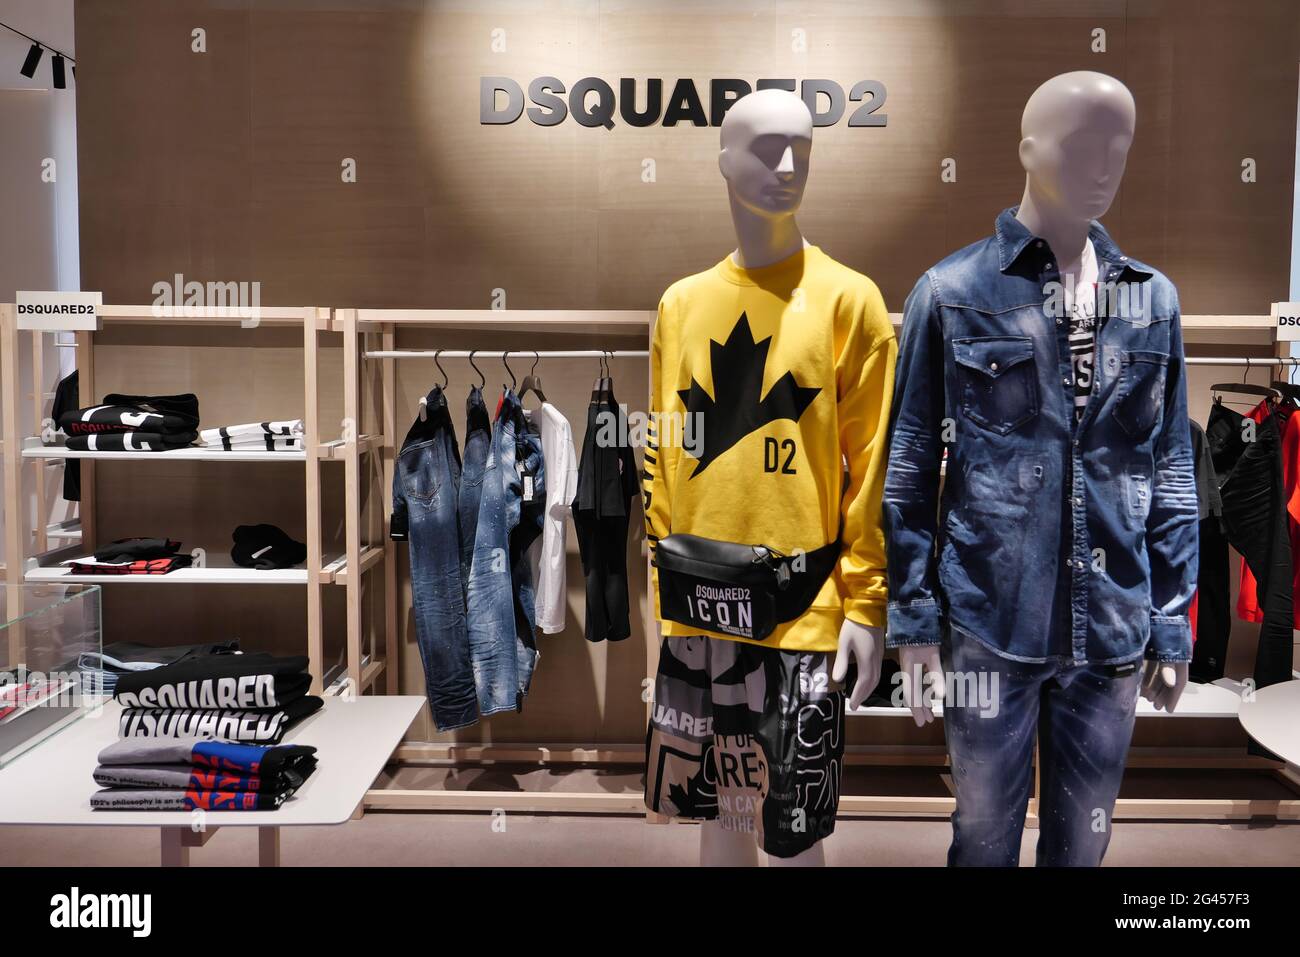 CLOTHES ON DISPLAY AT DSQUARED2 BOUTIQUE INSIDE THE RINASCENTE FASHION STORE  Stock Photo - Alamy